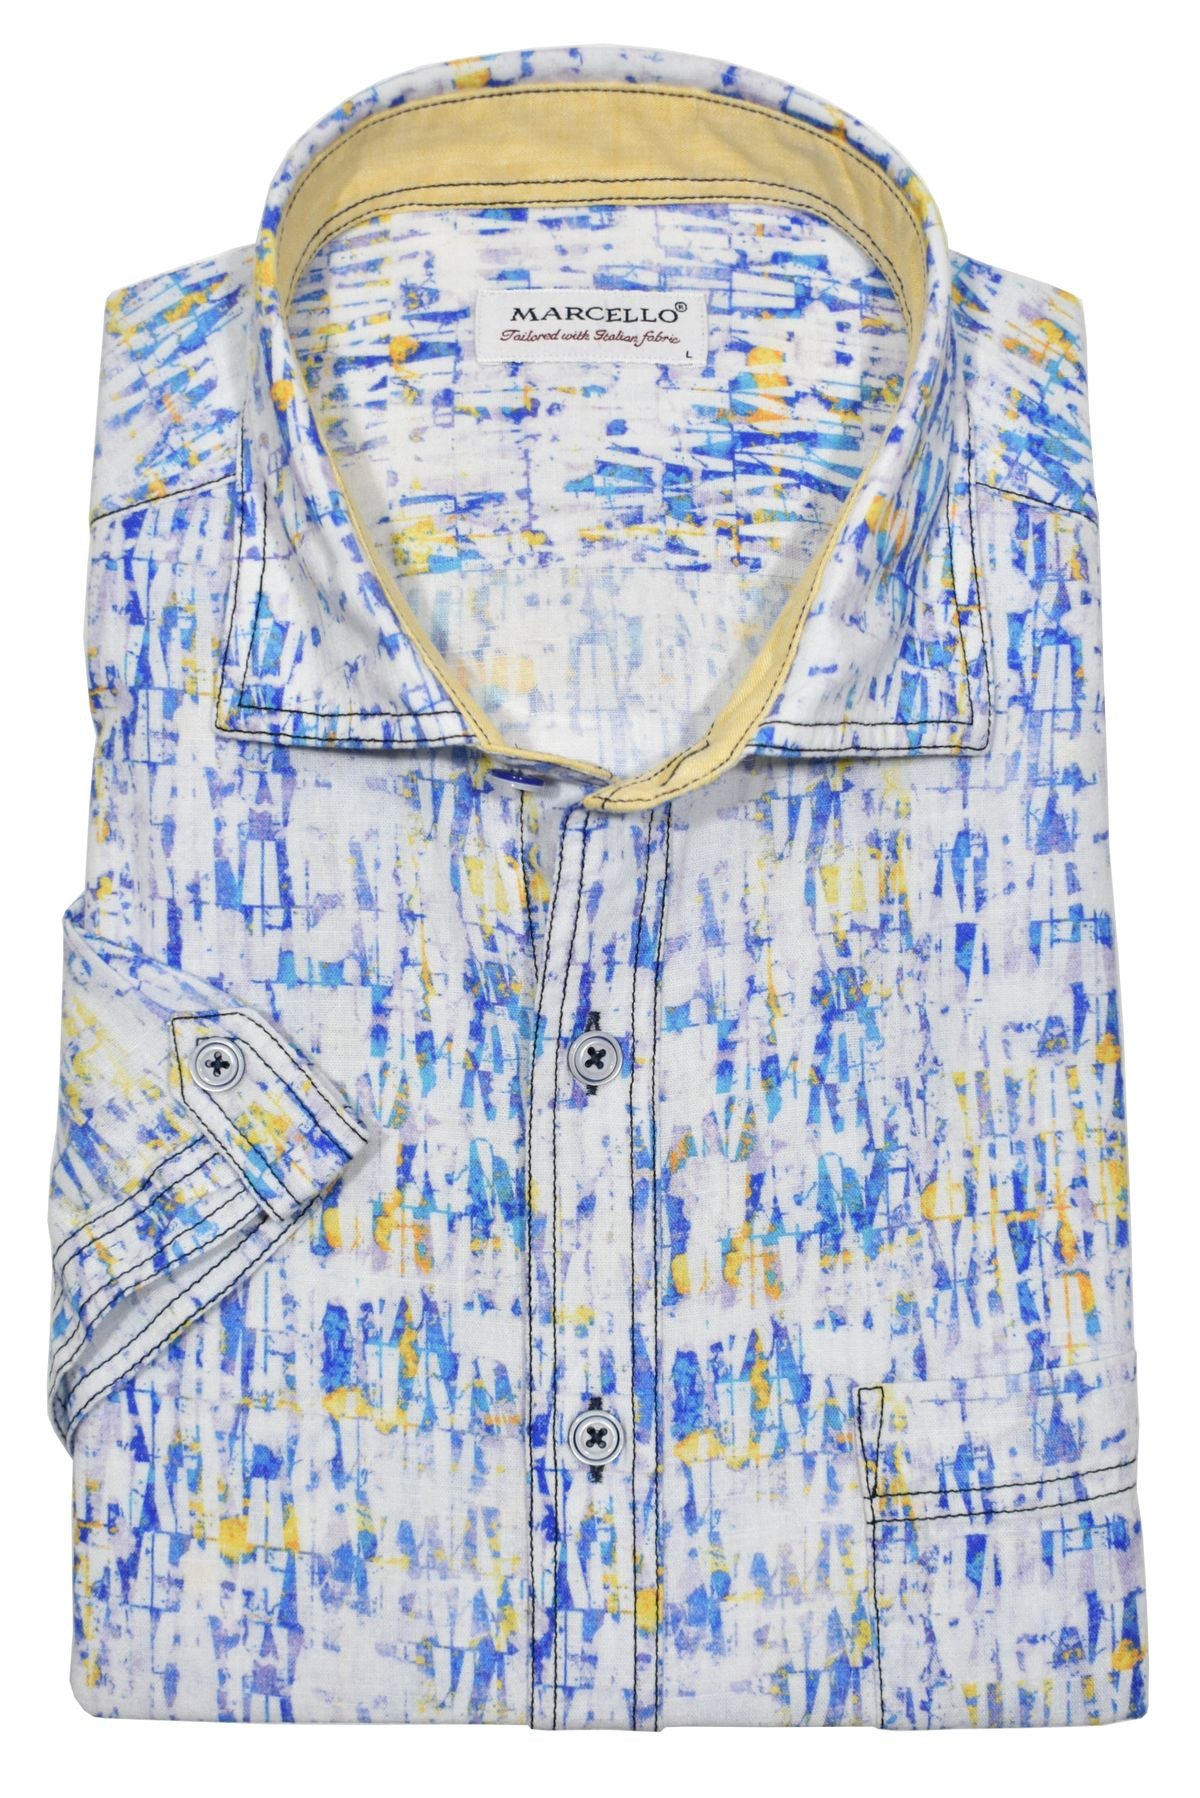 Look effortlessly stylish and sophisticated with this W826S Abstract Cotton Linen Print. Crafted with a blend of soft cotton and linen, it offers the classic linen look without the wrinkling. Featuring an abstract blue and maize pattern, it's finished with custom buttons, trim fabric and a soft trend collar for an elegant touch. Cotton linen shirt by Marcello.